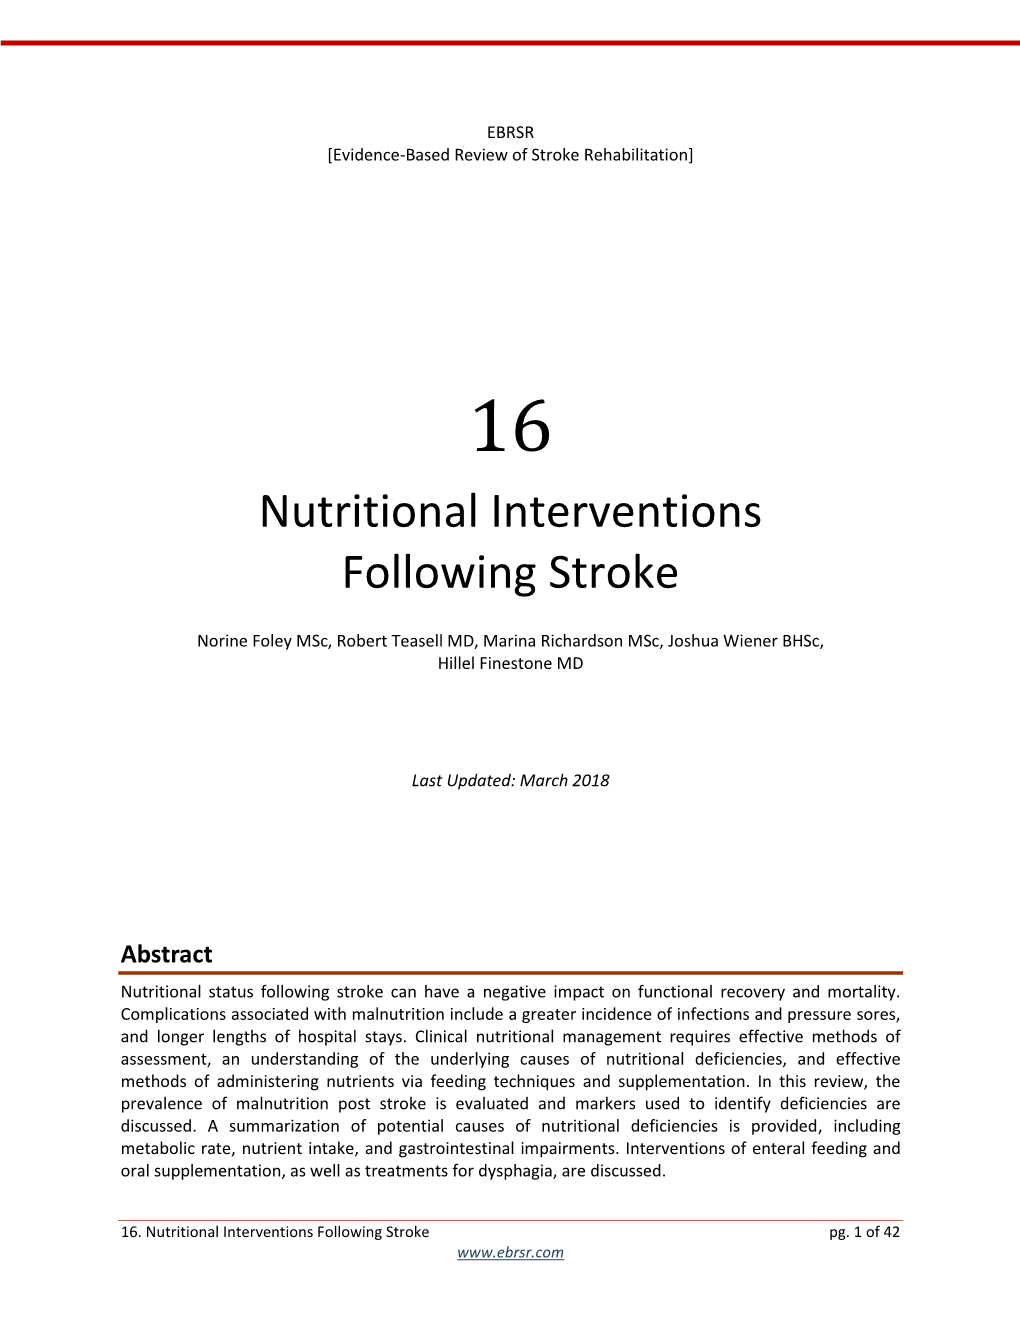 Nutritional Interventions Following Stroke